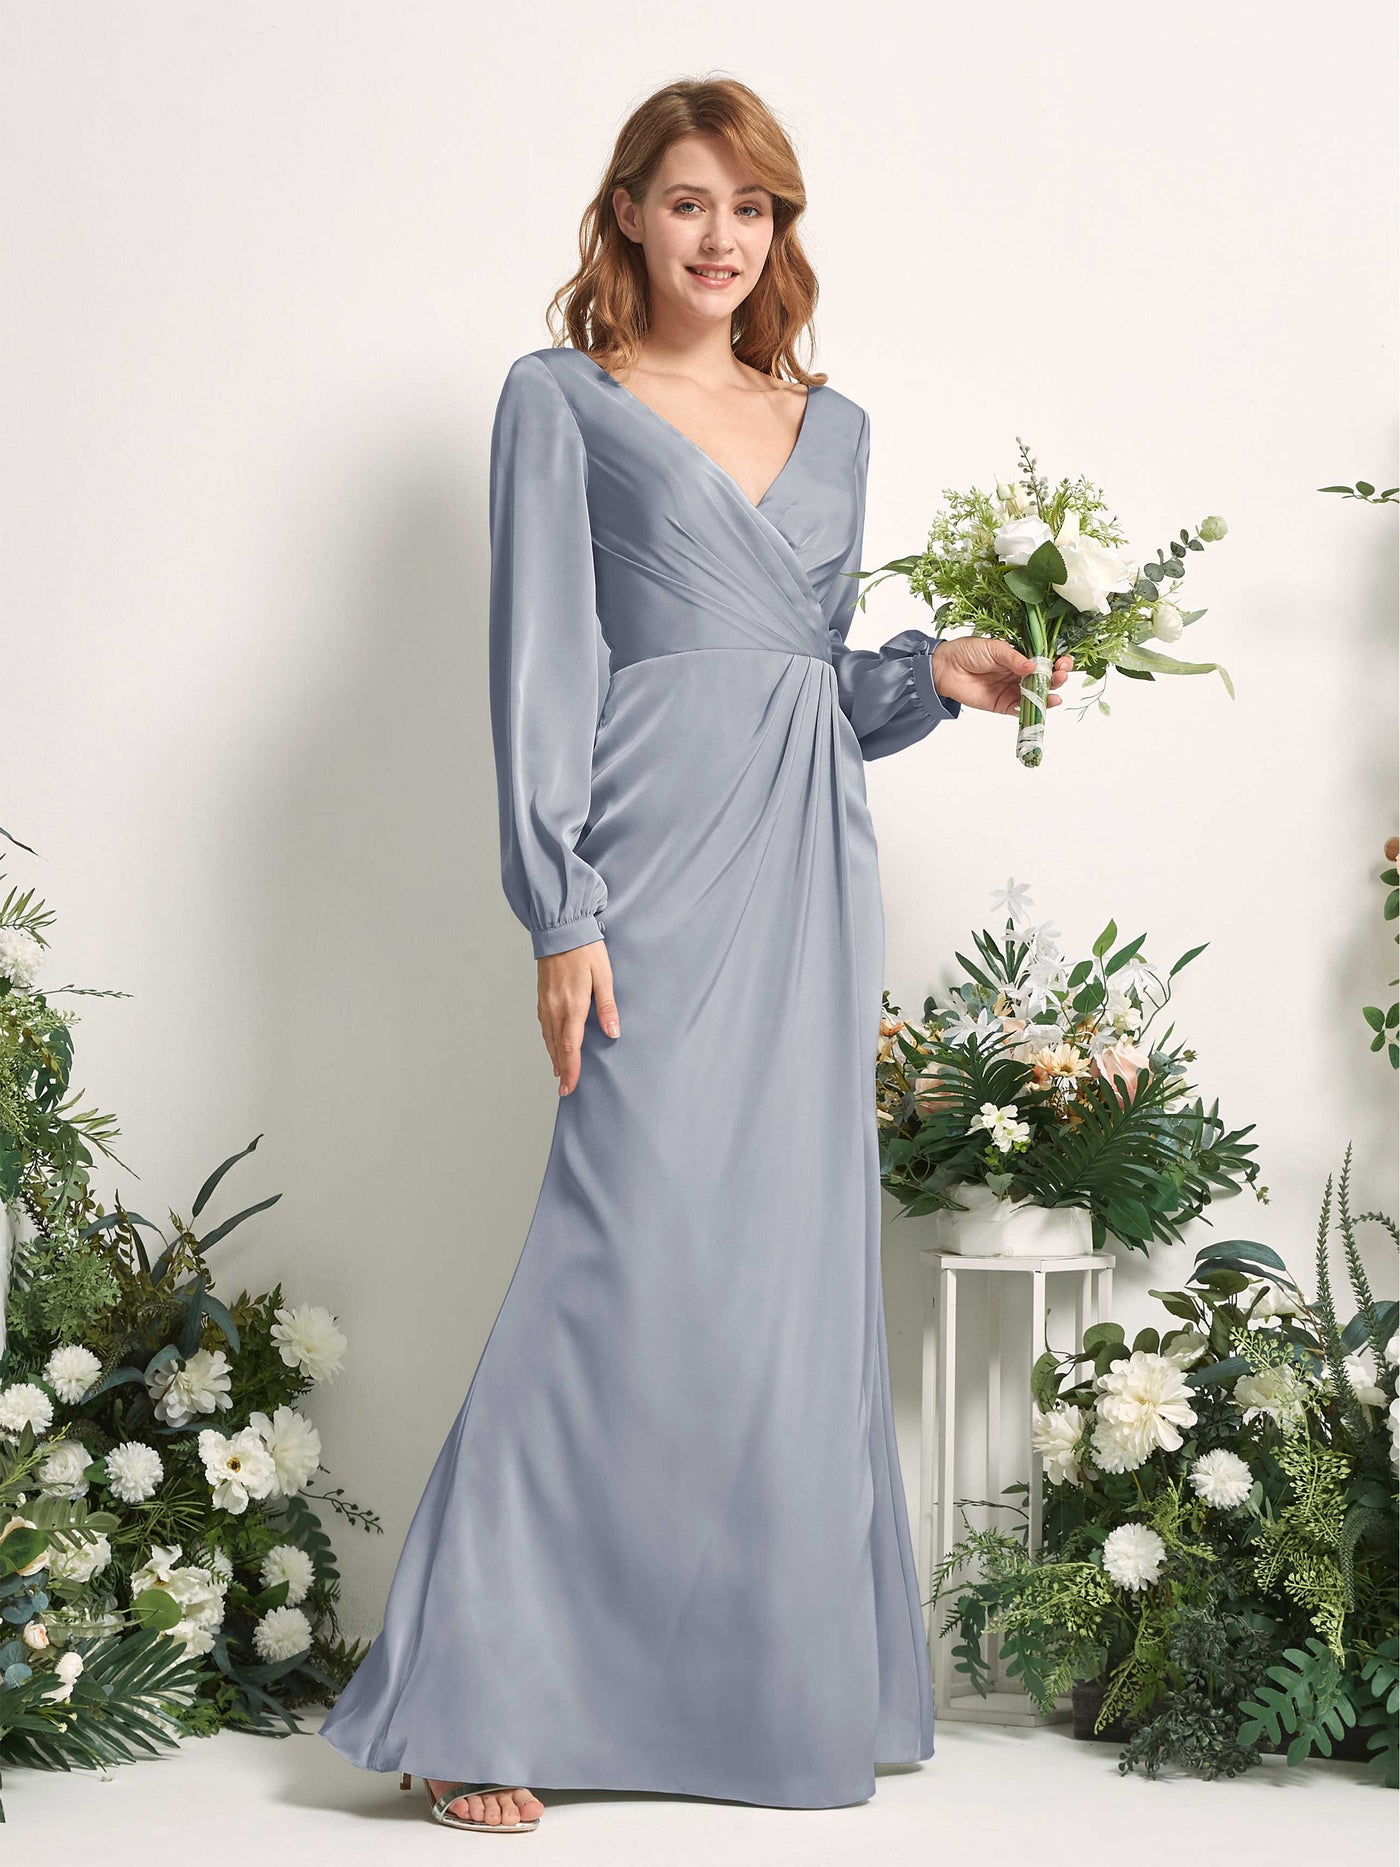 Dusty Blue Bridesmaid Dresses Bridesmaid Dress Ball Gown Satin V-neck Full Length Long Sleeves Wedding Party Dress (80225178)#color_dusty-blue